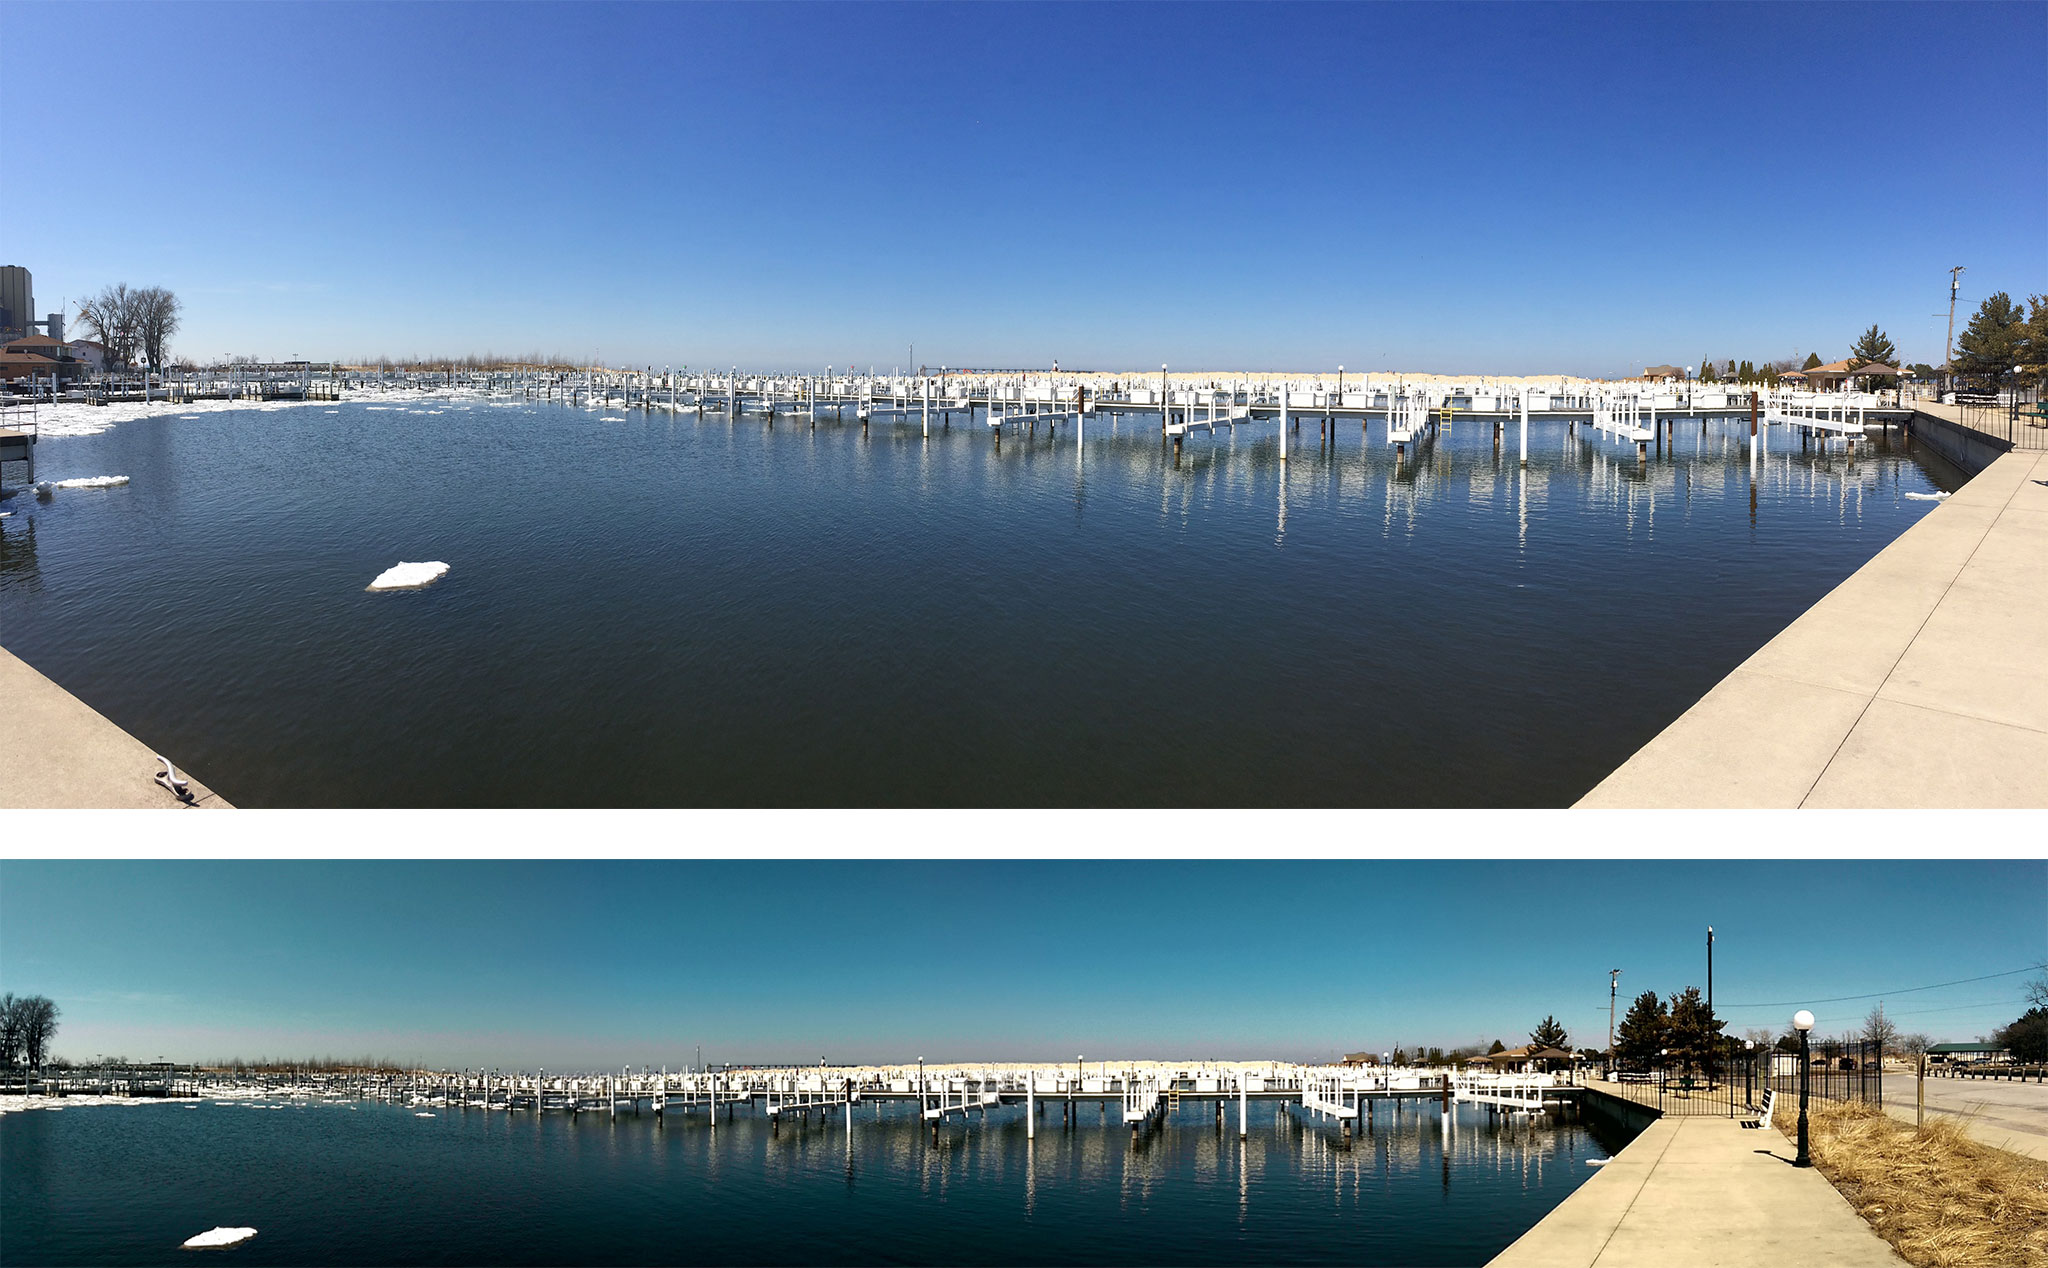 HTC One M8 vs. iPhone 5s: Panoramas